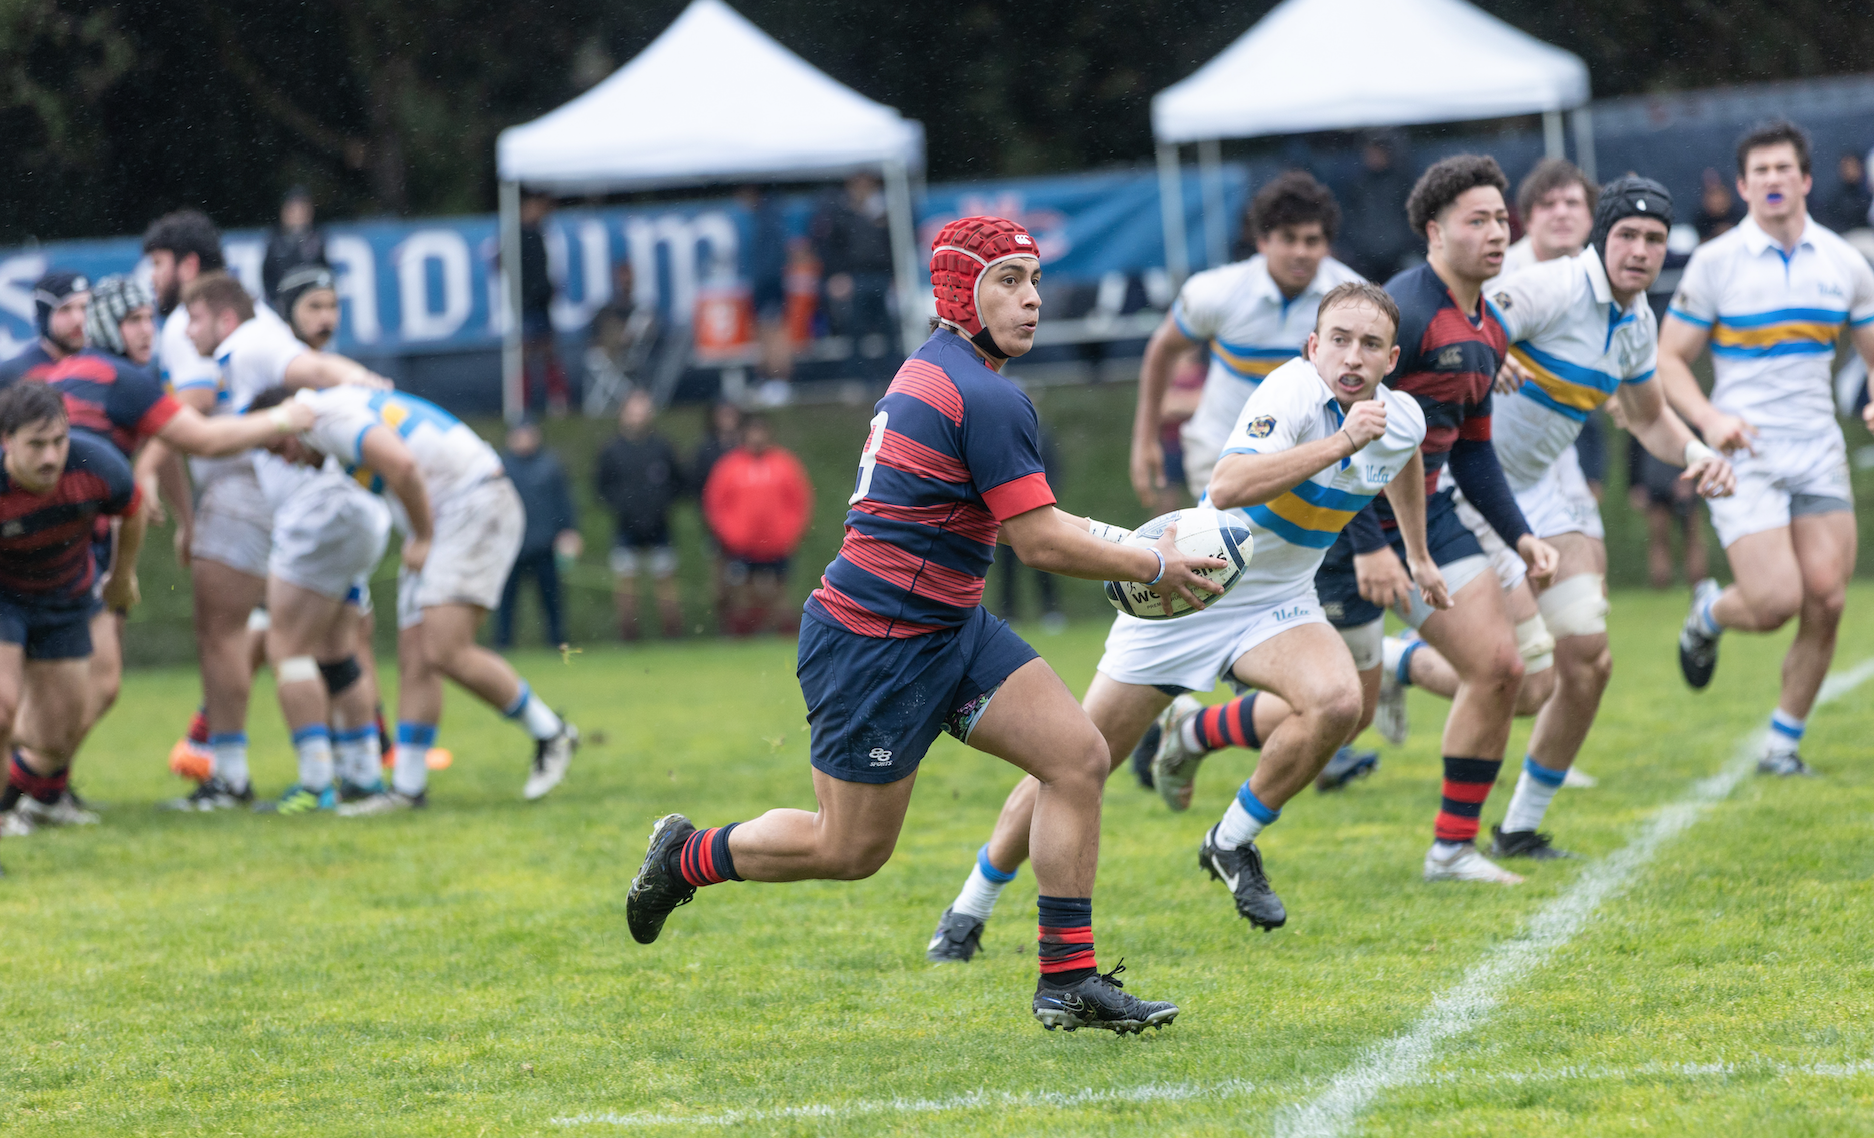 William Lhommedieu runs towards the try line during the rugby game